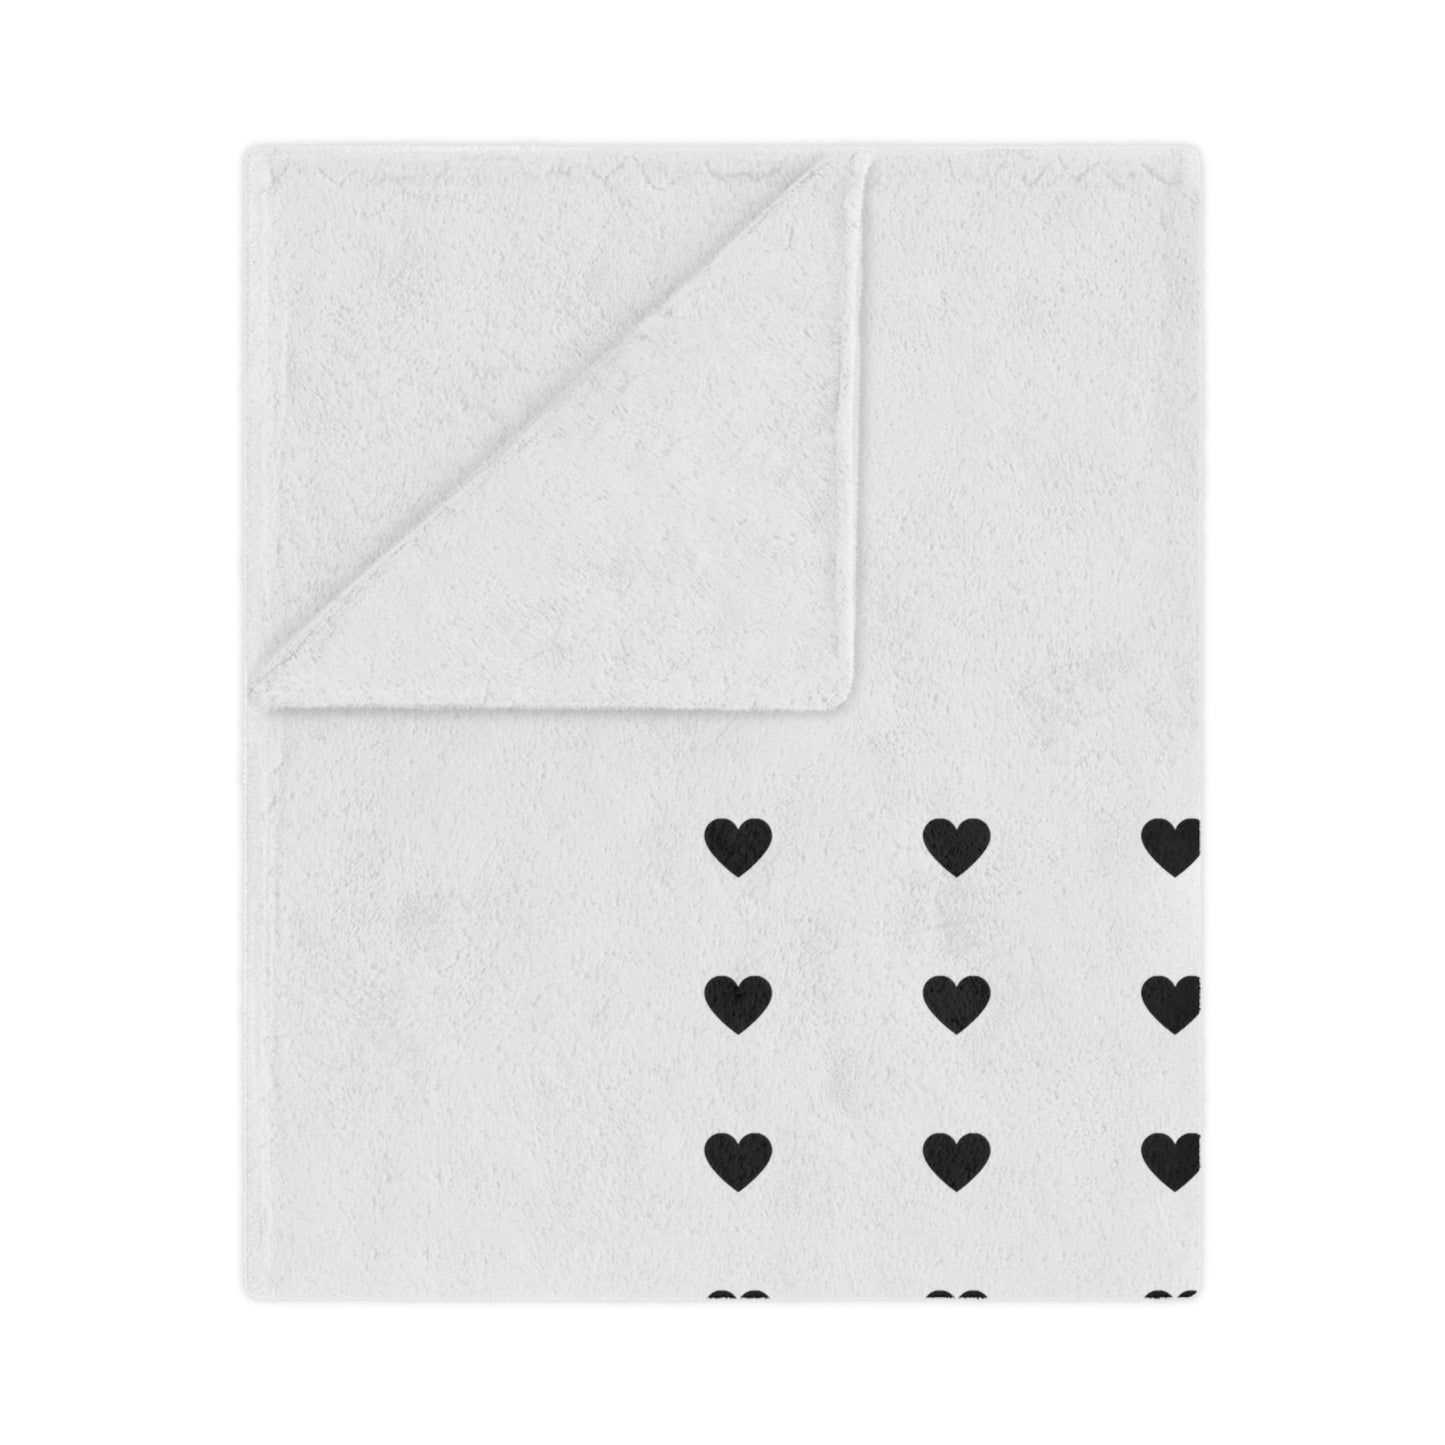 You are thw one Printed Velveteen Minky Blanket for Valentine